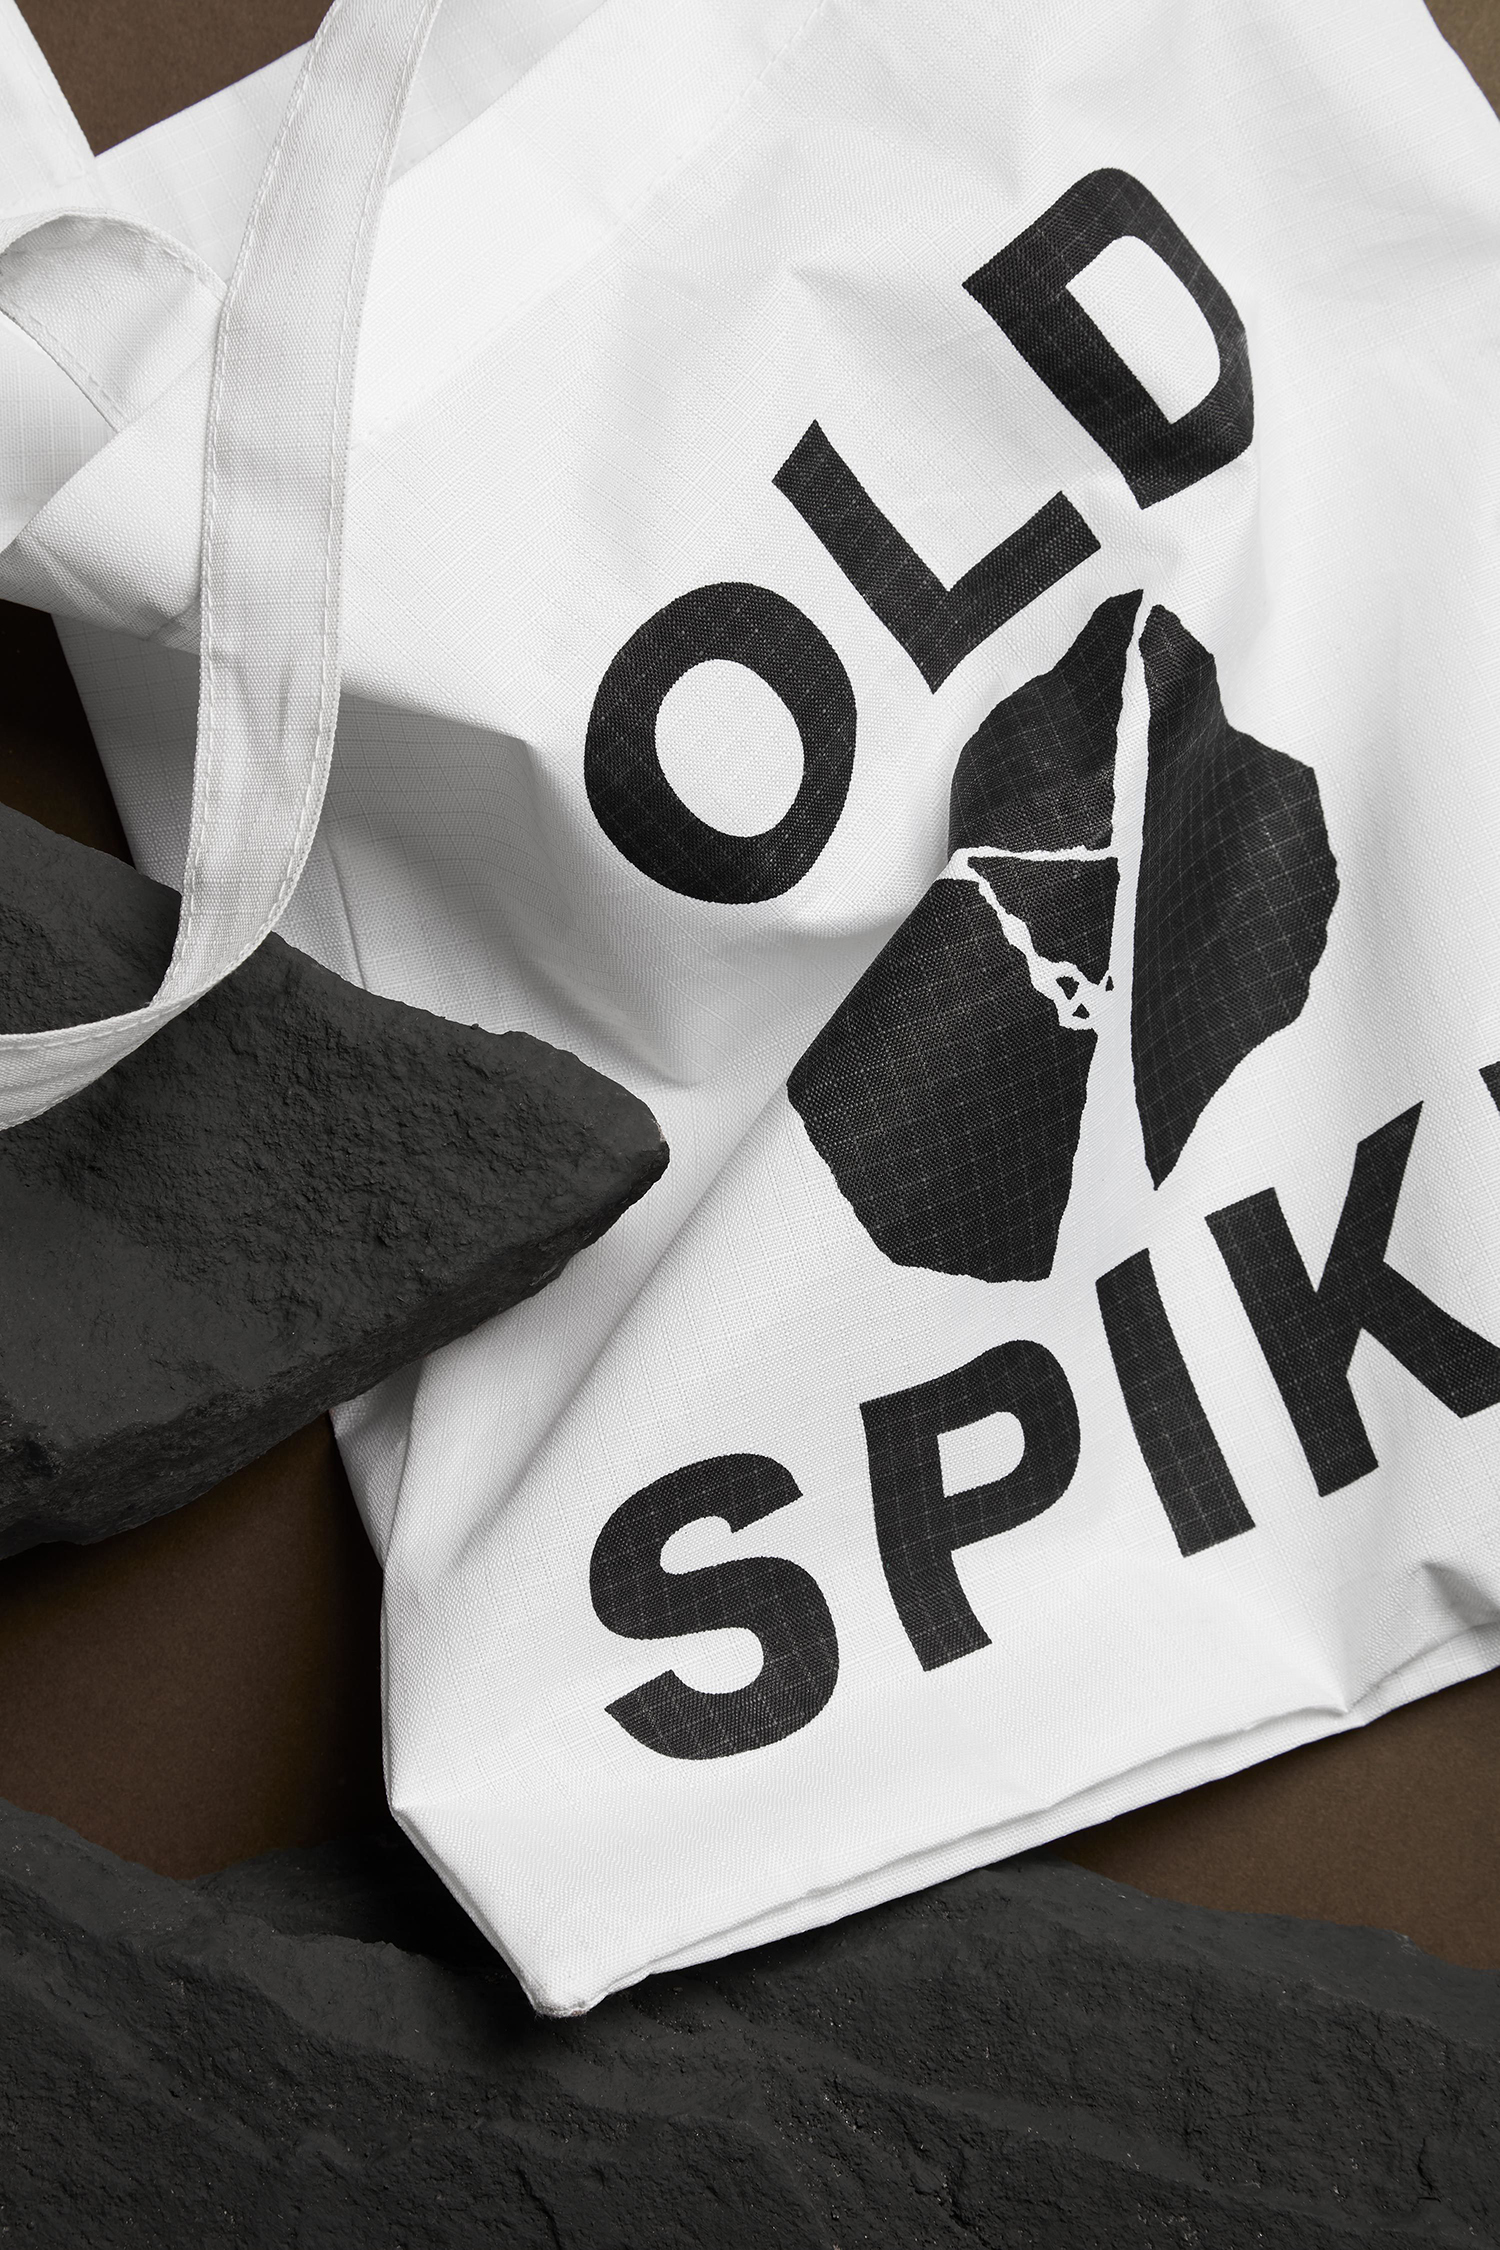 Logo and tote bag designed by Commission Studio for London-based coffee roaster Old Spike